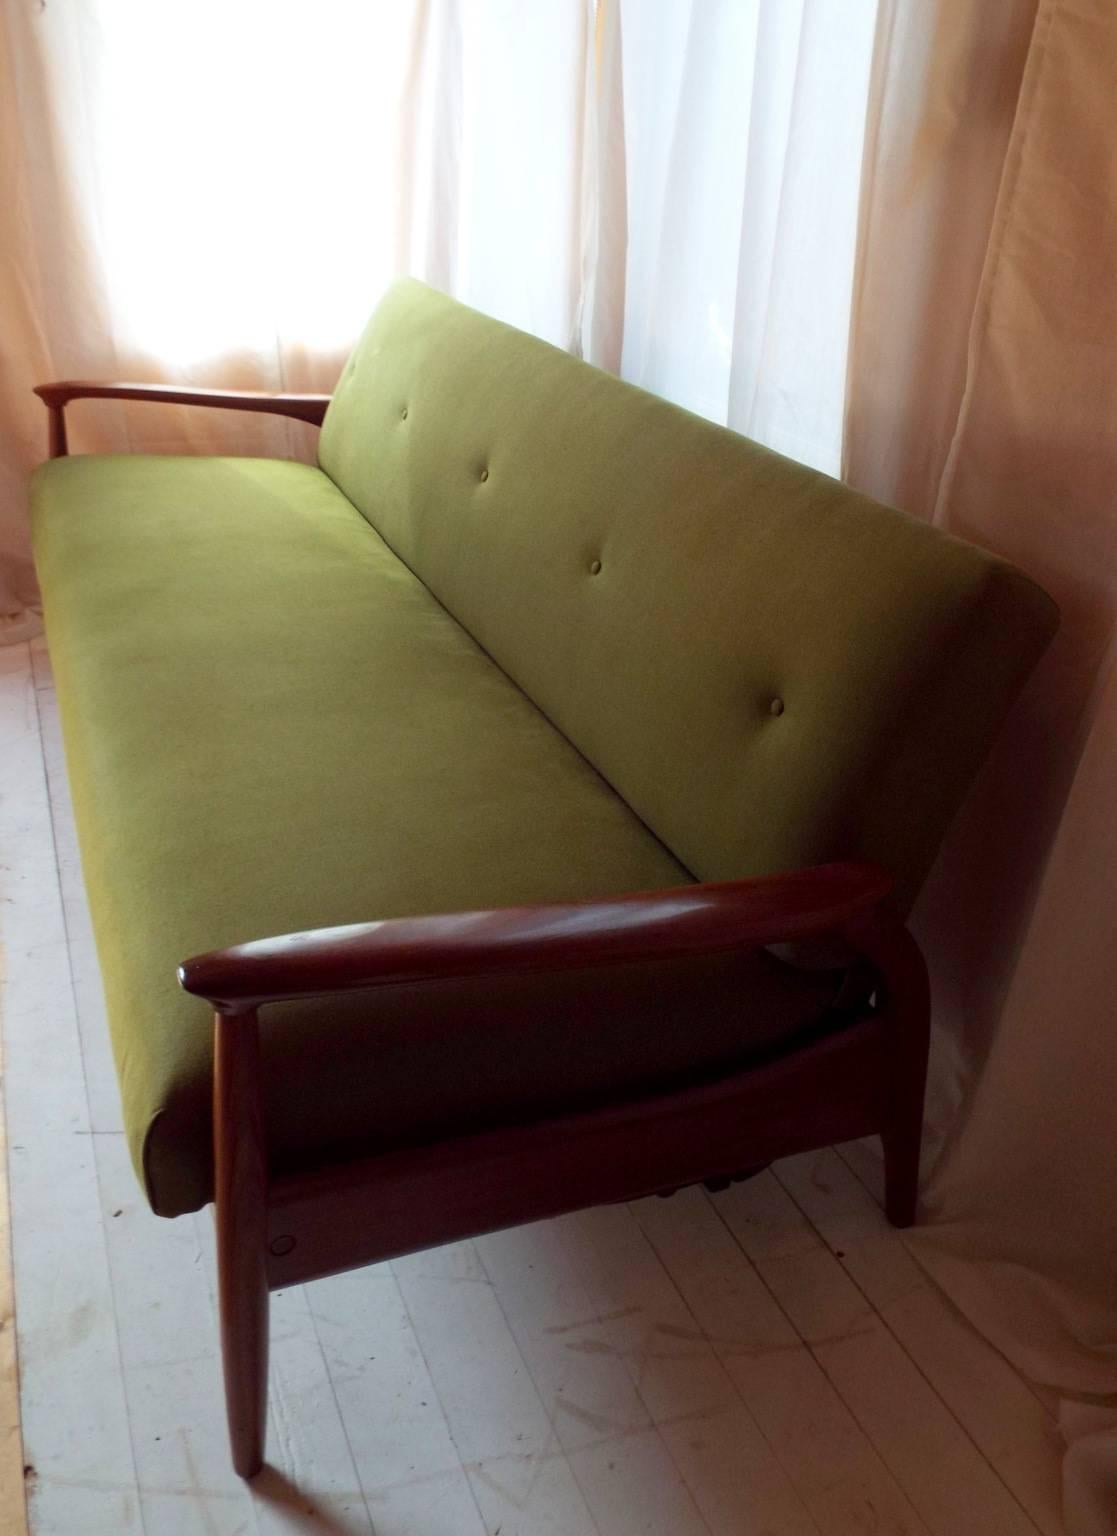 Great Britain (UK) 1960s Greaves and Thomas Sofa Bed For Sale